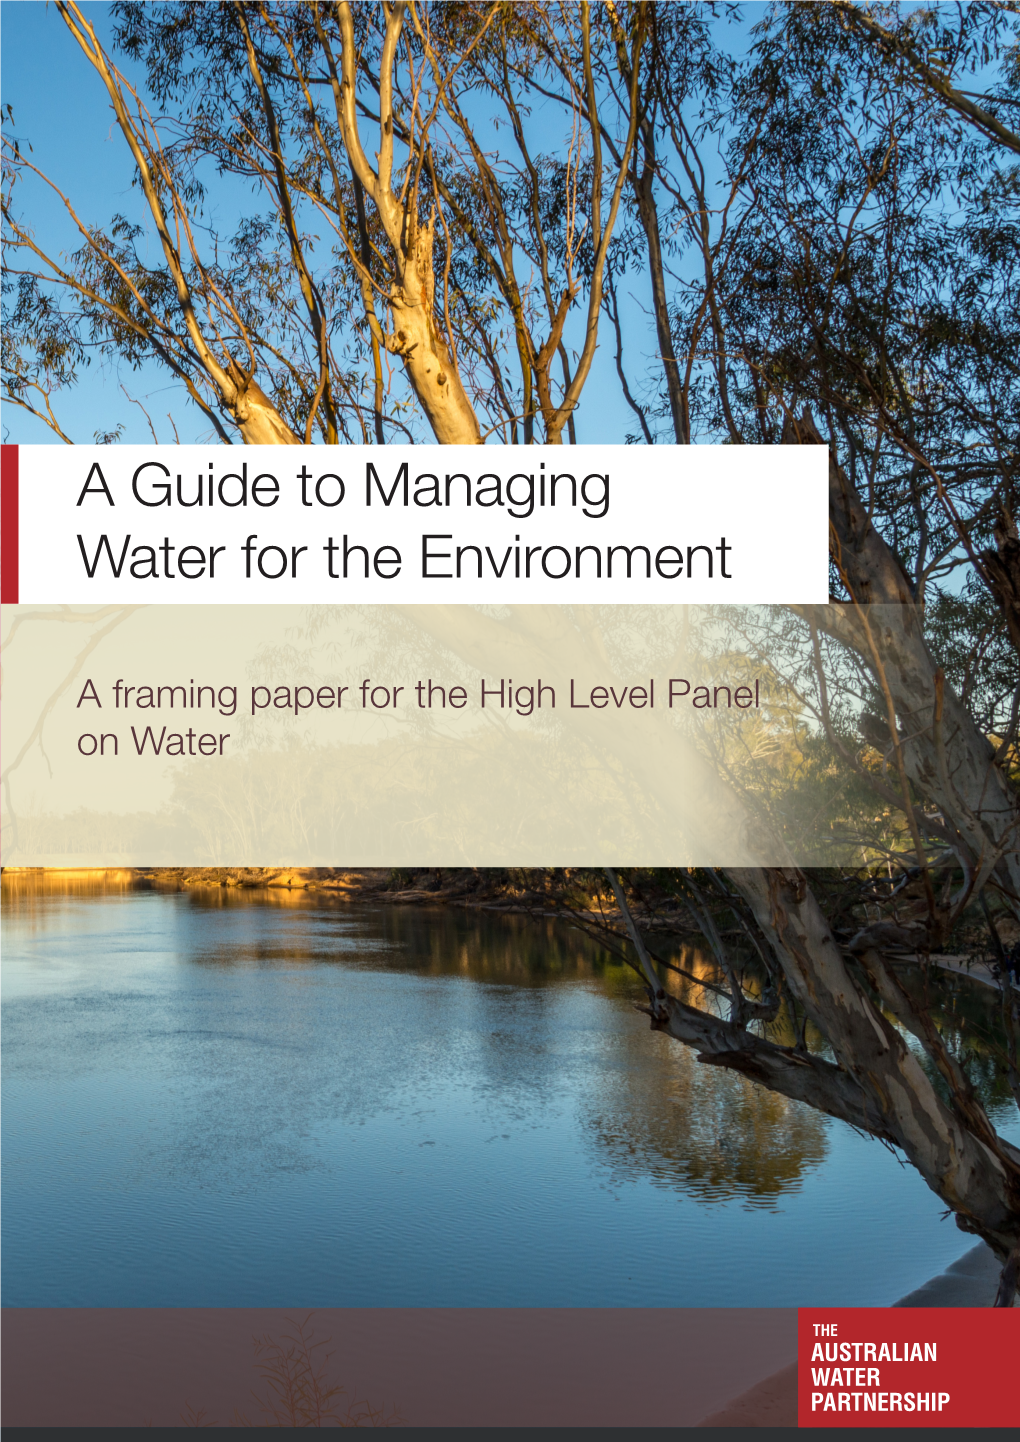 A Guide to Managing Water for the Environment